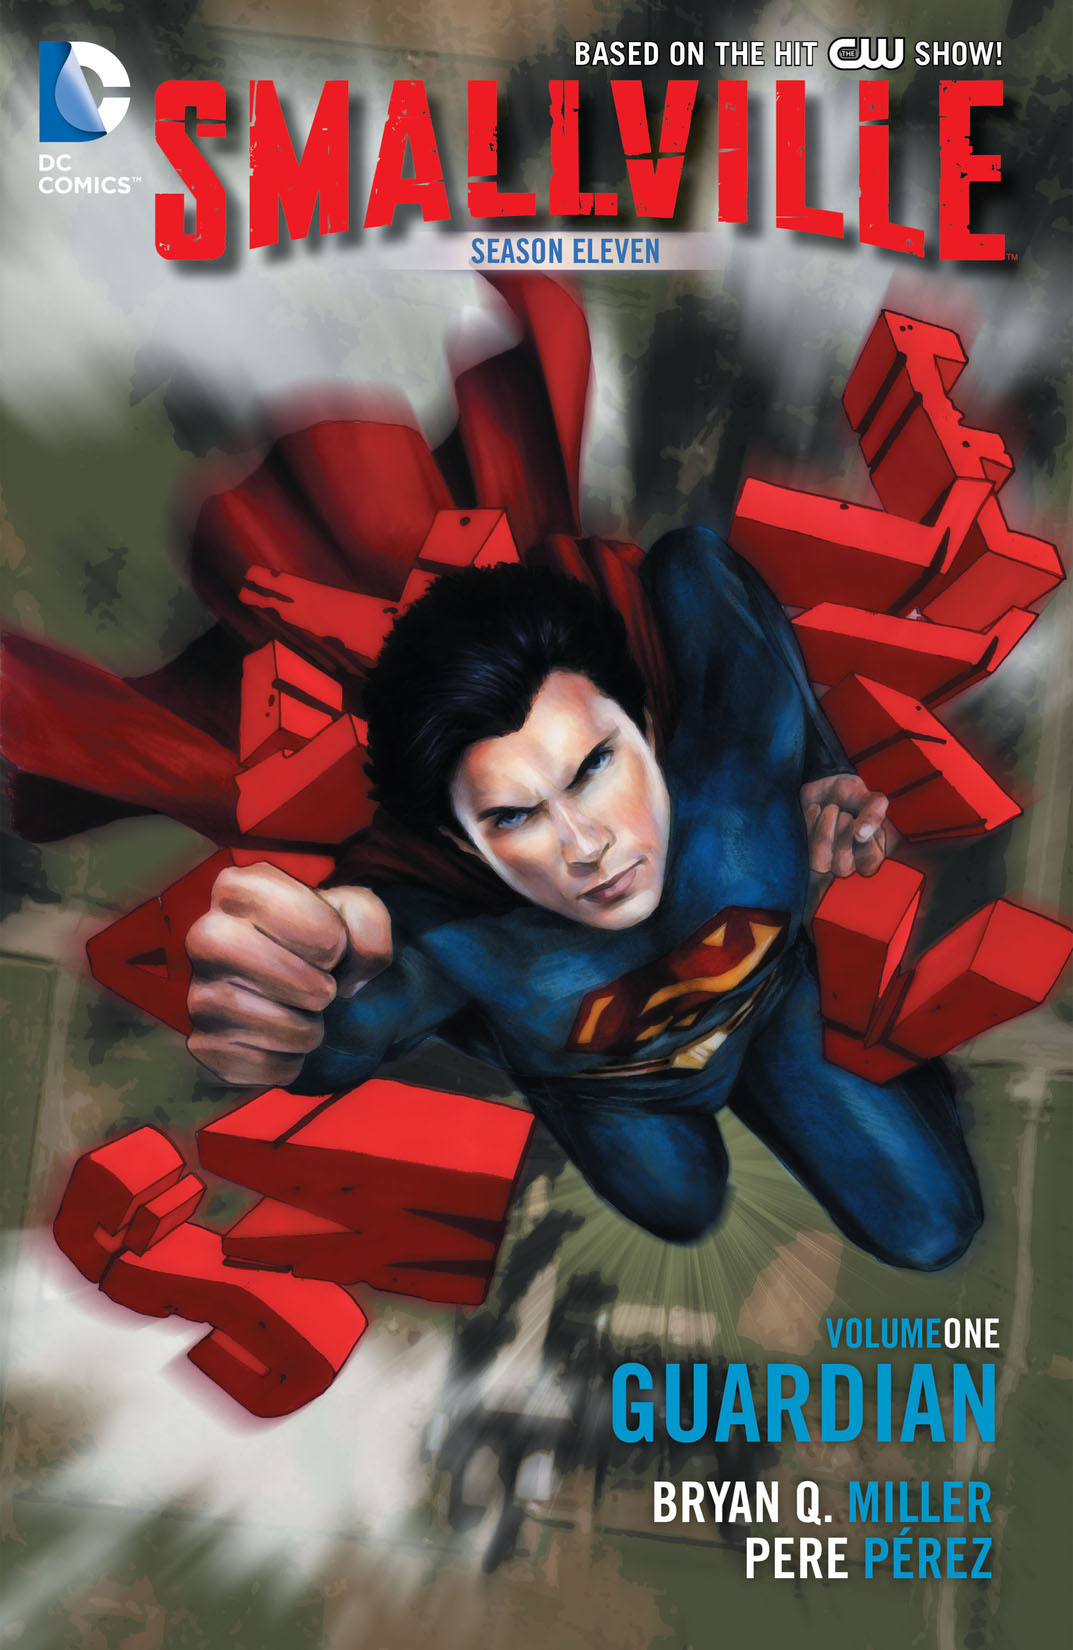 Smallville Season 11 Vol. 1: The Guardian preview images